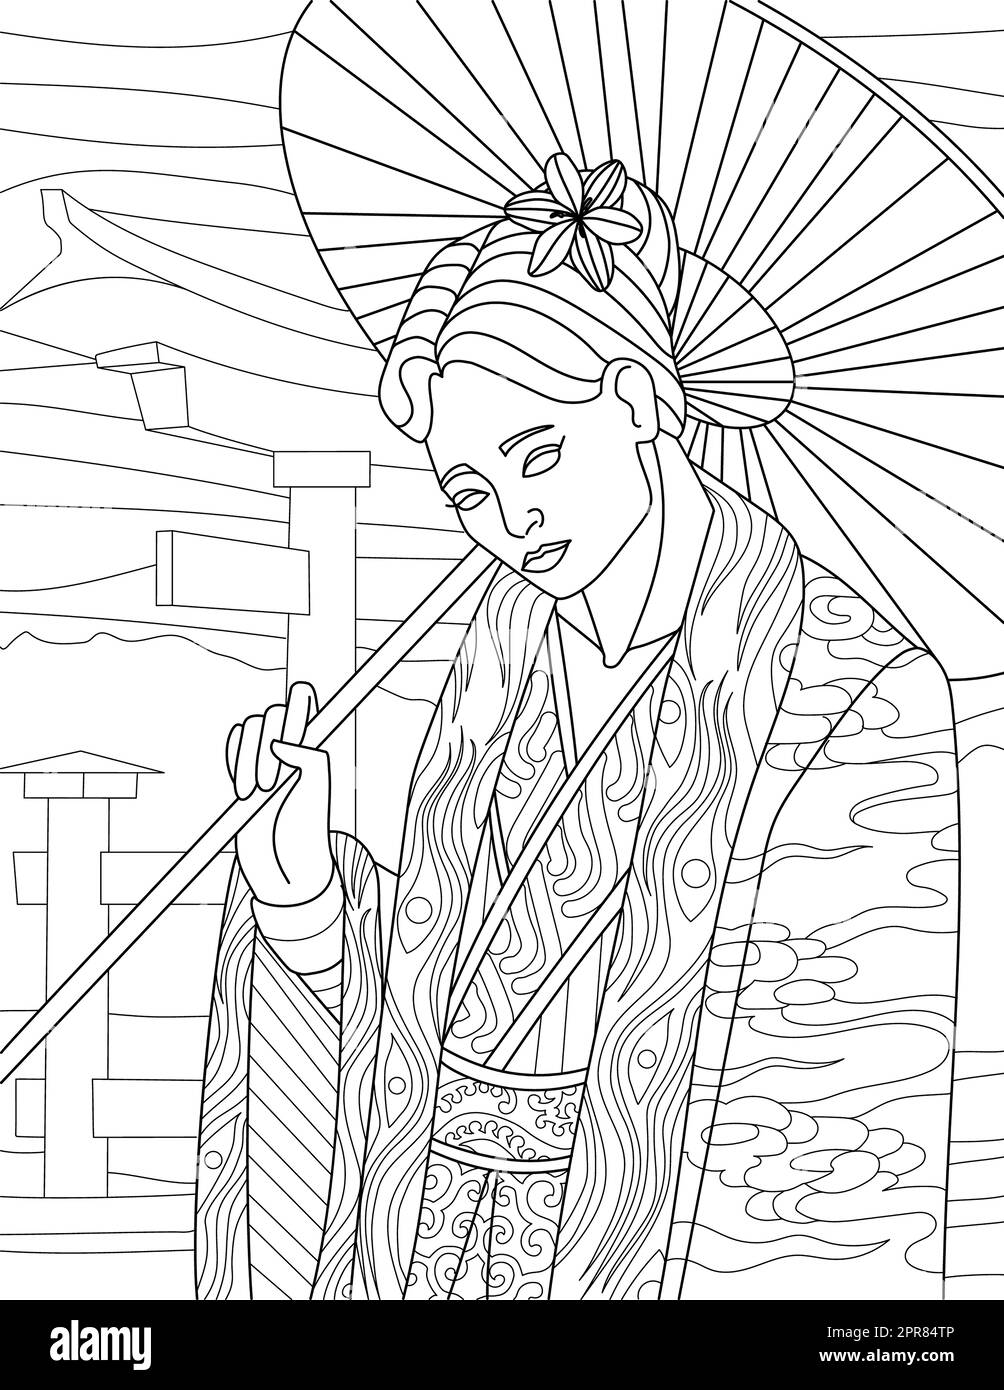 Coloring Page With Japanese Woman In Traditional Clothes Holding Umbrella. Stock Photo